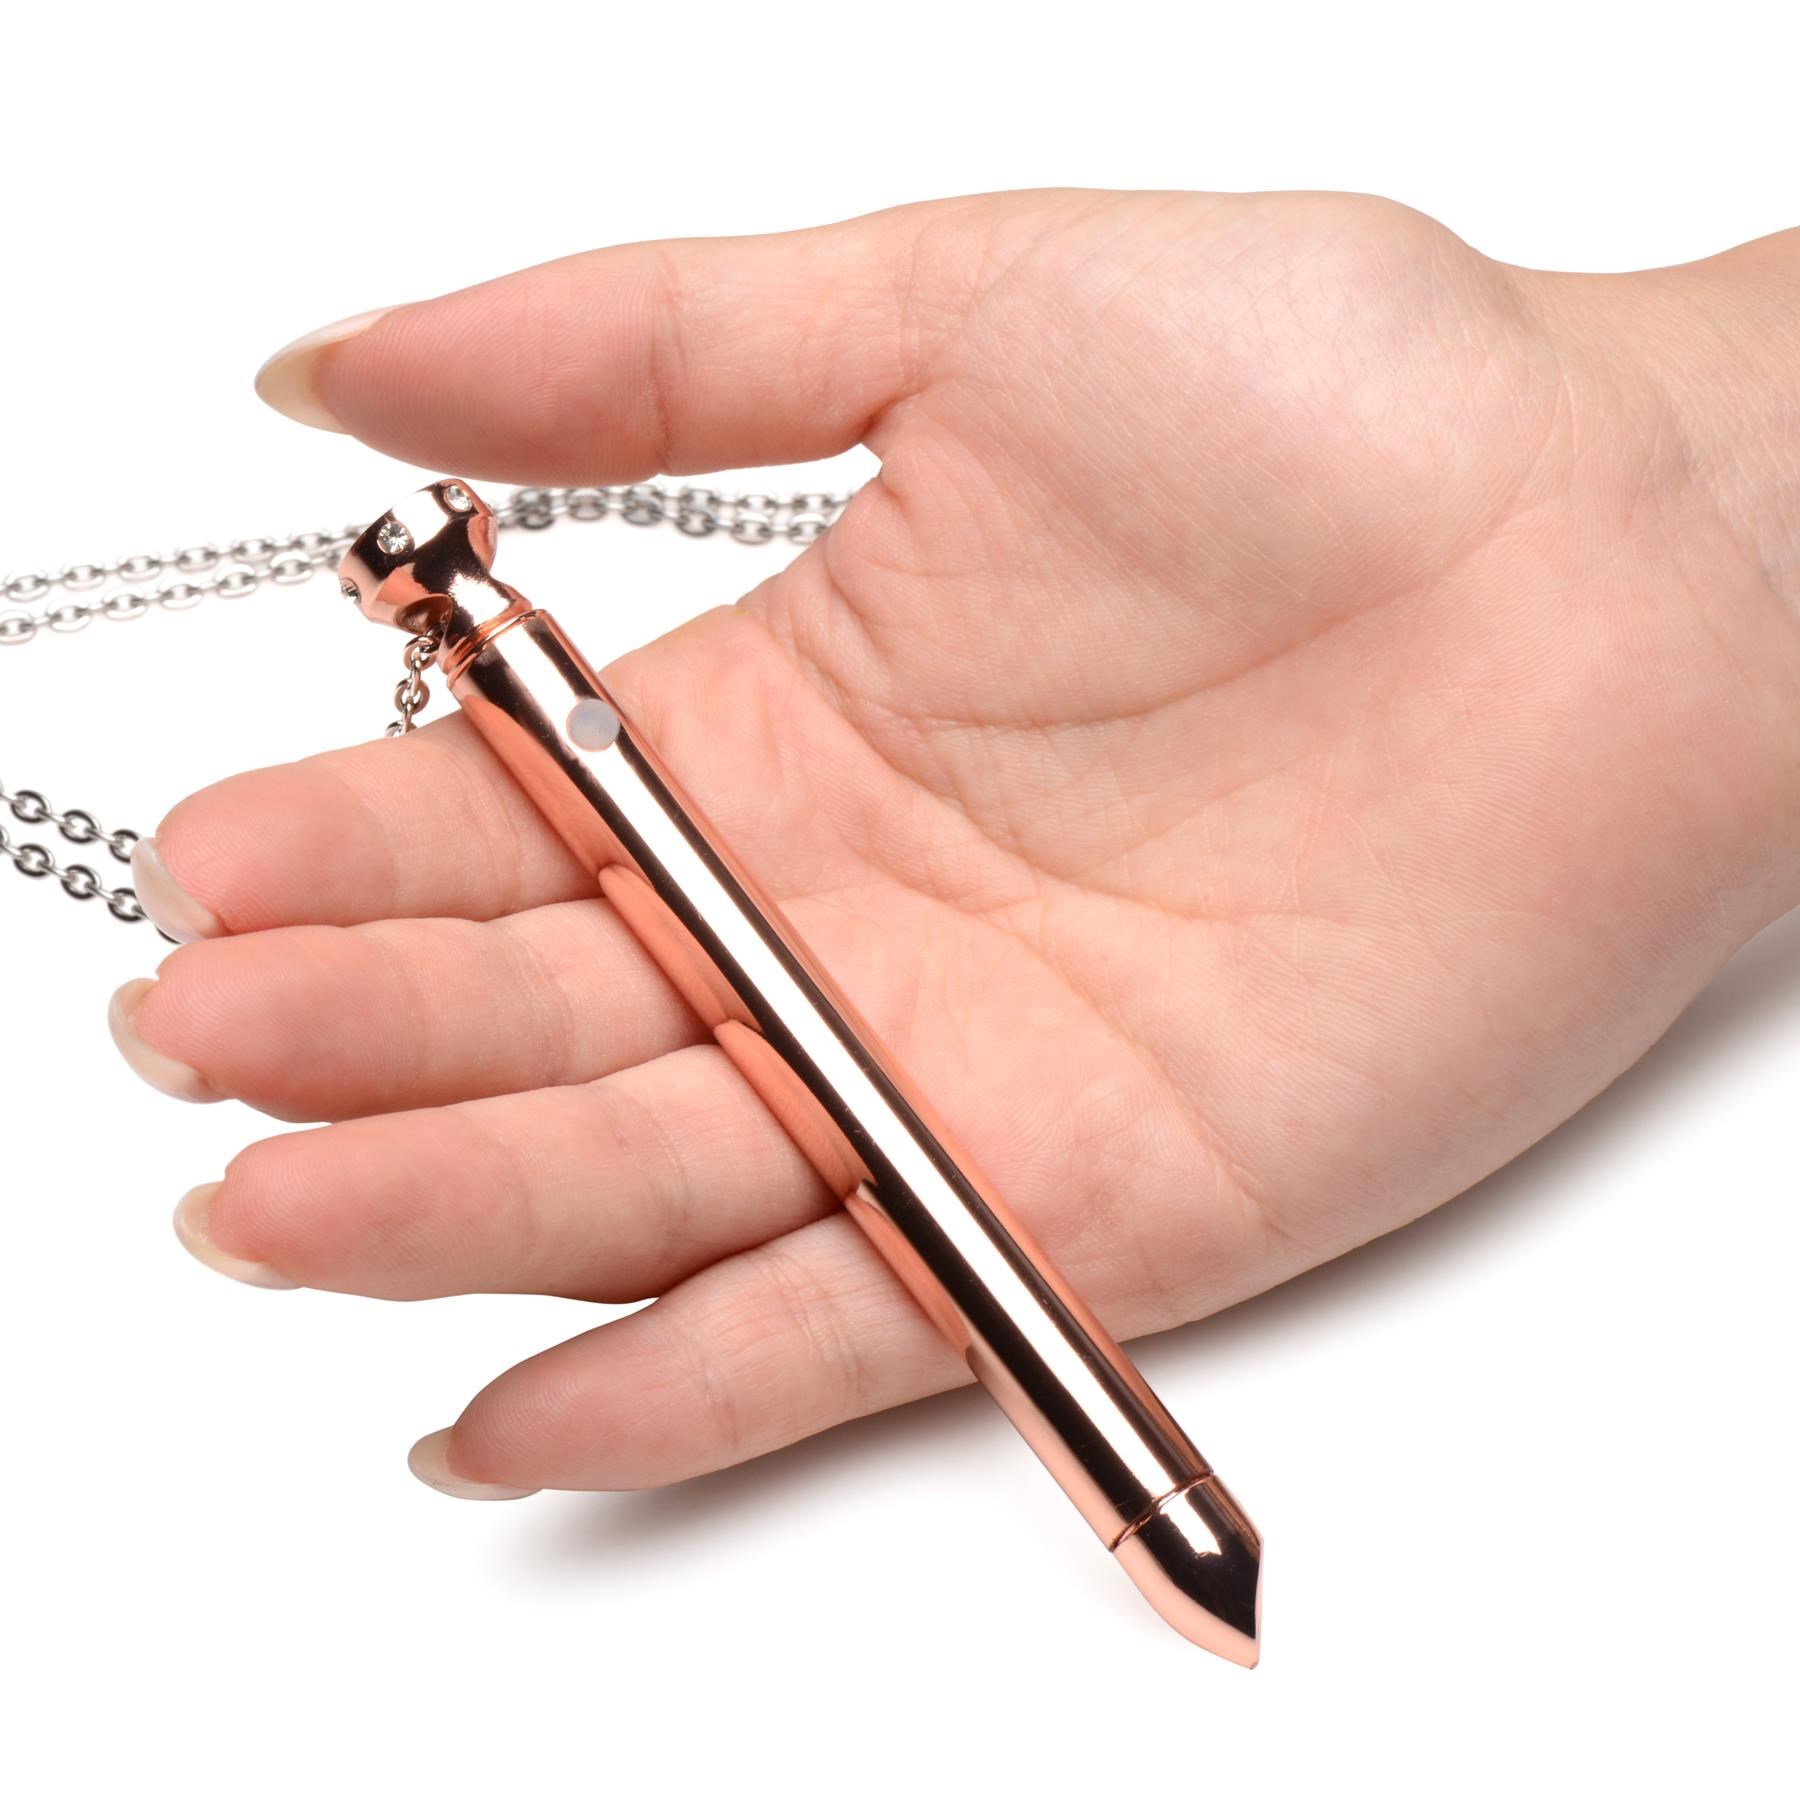 Charmed Vibrating Necklace - Product Shot - Rose Gold - Hand Shot